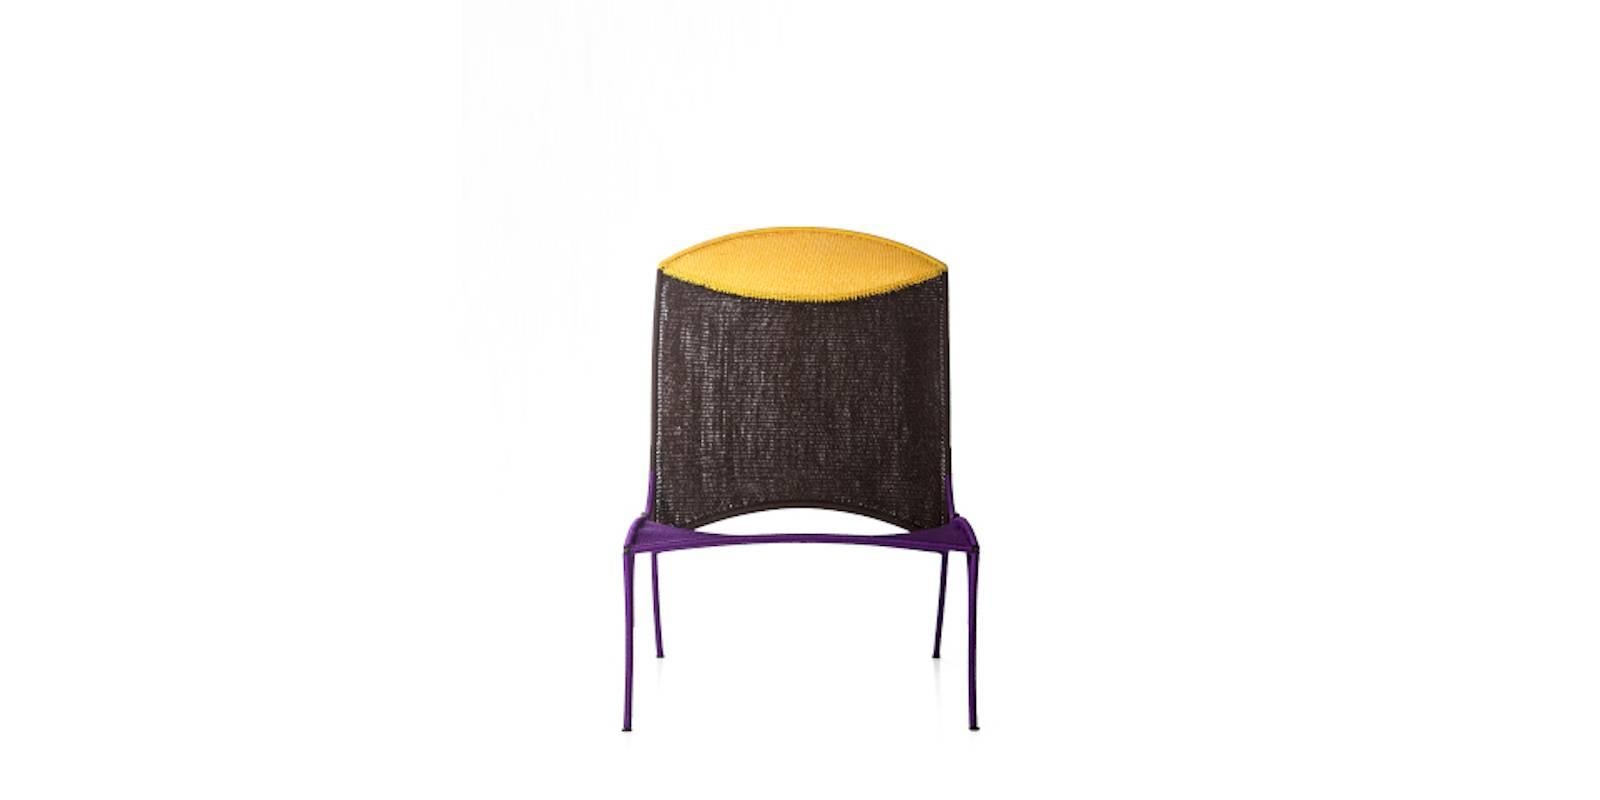 Arco chair B. by Martino Gamper for Moroso for indoor and outdoor in multi-color.

The Arco collection is part of the M’Afrique collection, a range of chairs conceived by various designers and produced by African craft weavers using the yarn of